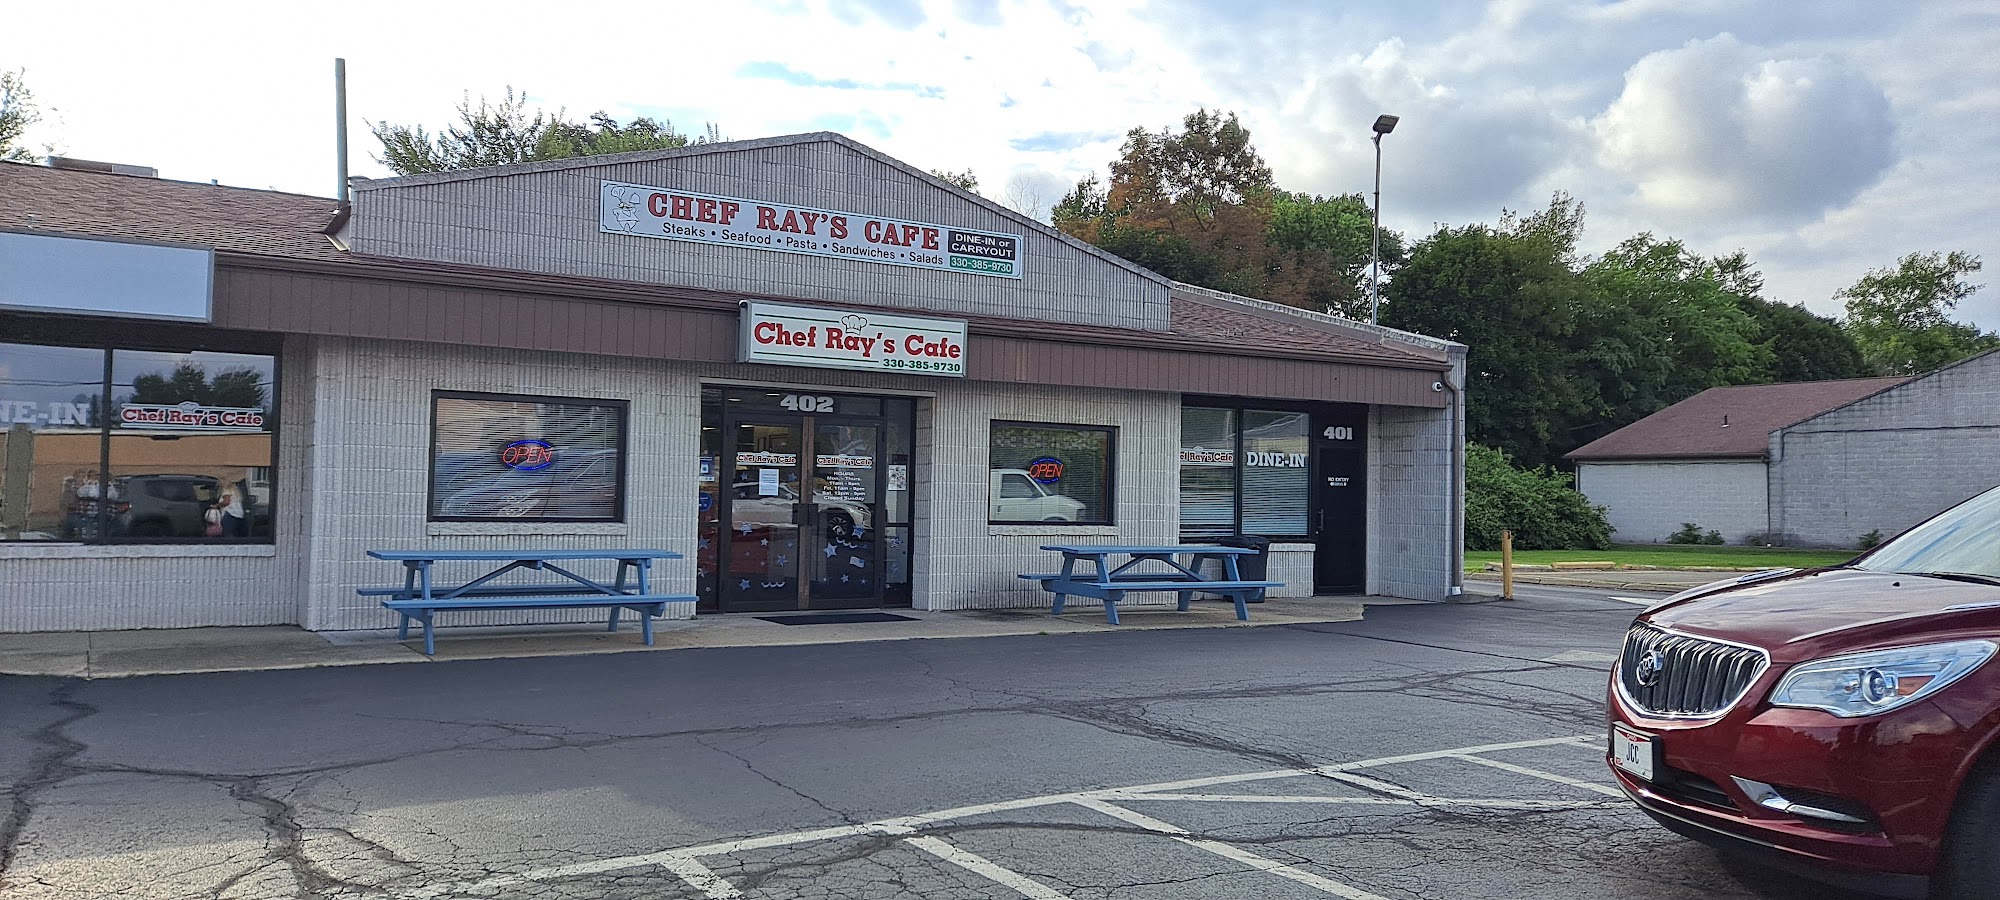 Chef Ray's Cafe